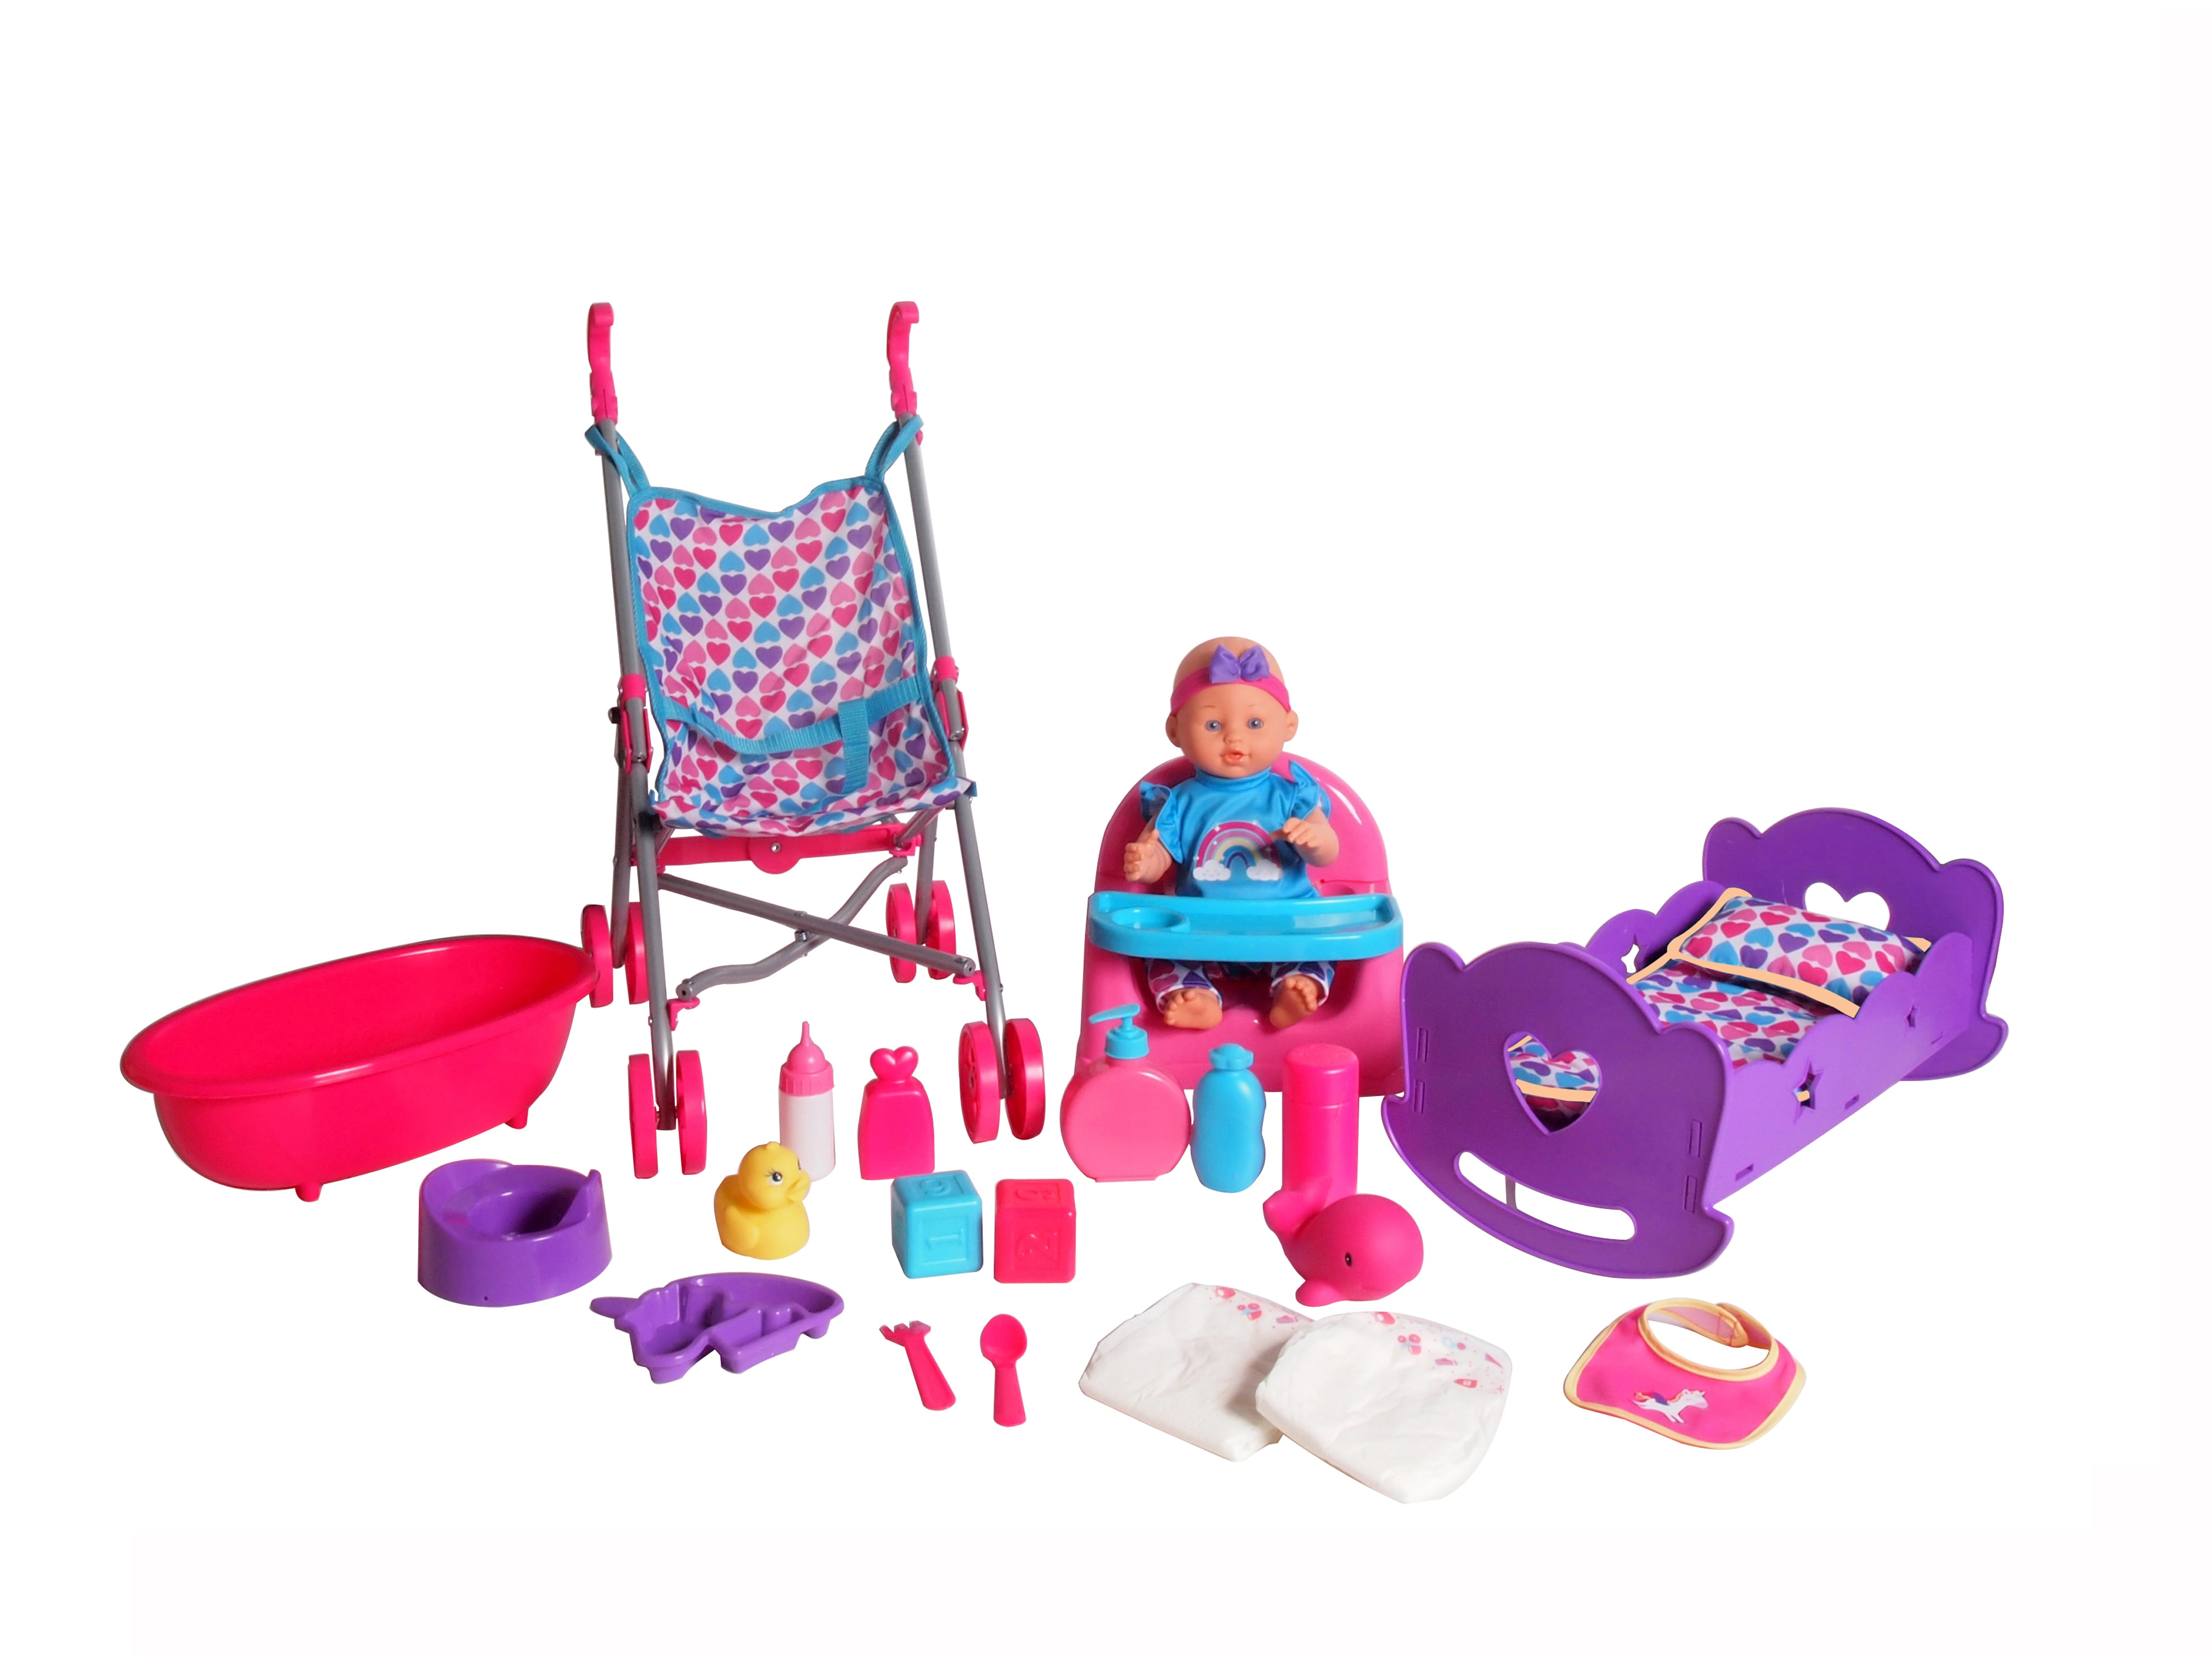 be my baby deluxe playset